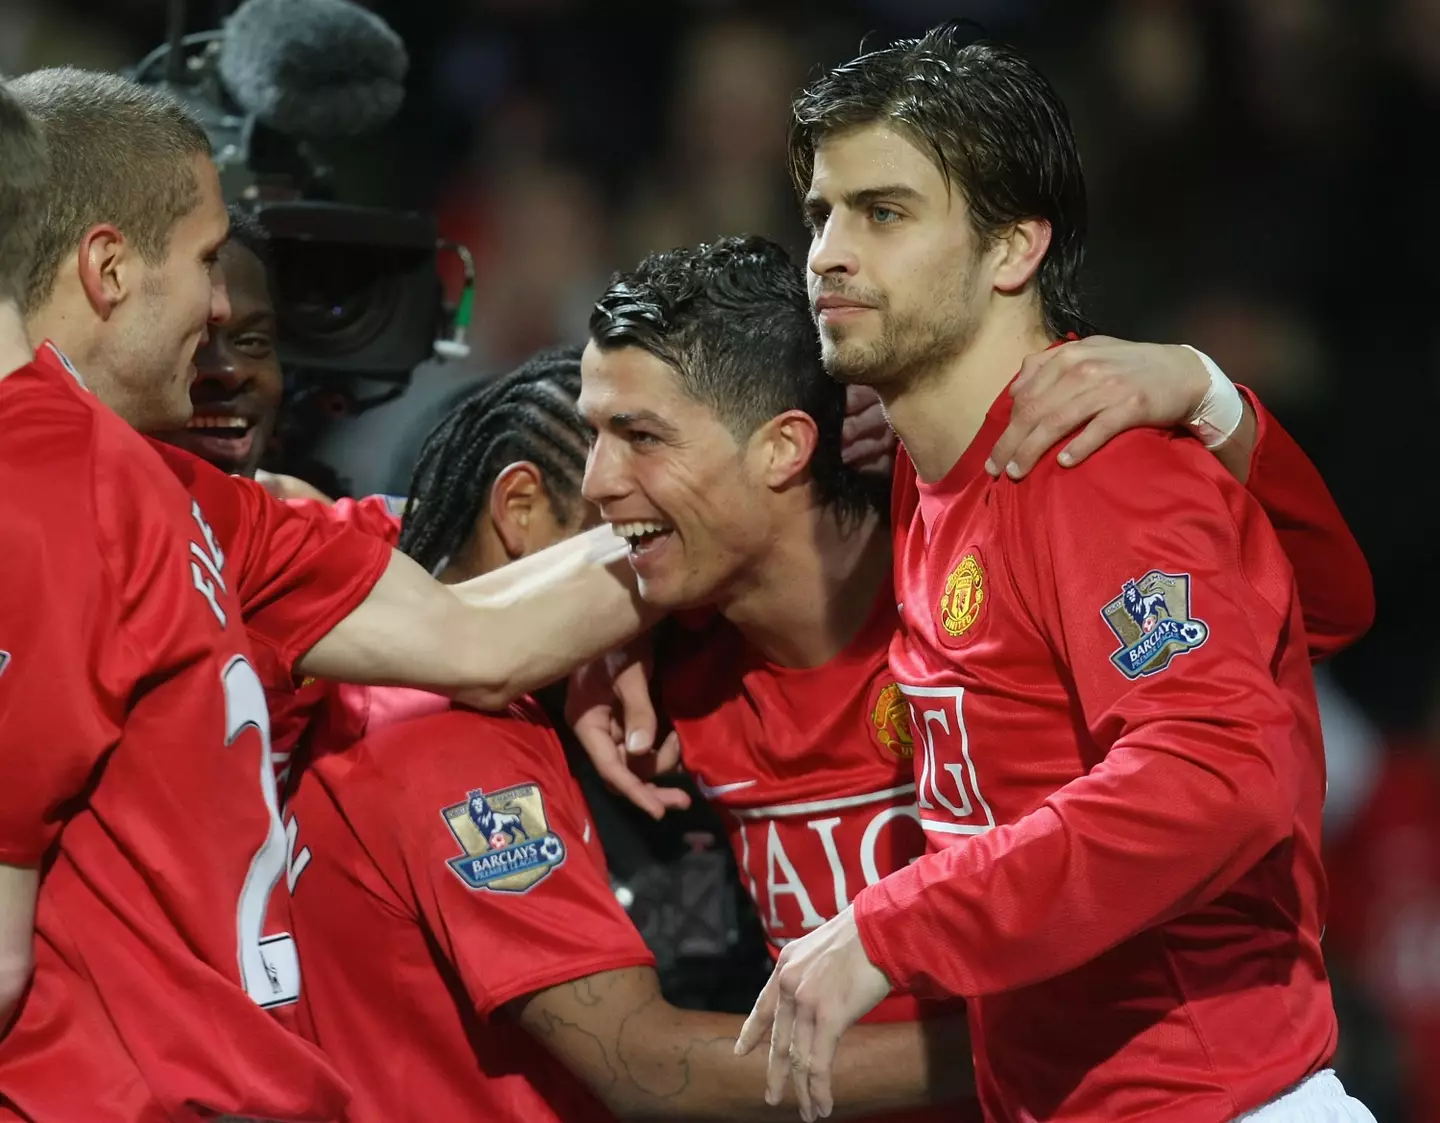 Ronaldo and Pique played together at Old Trafford. (Image